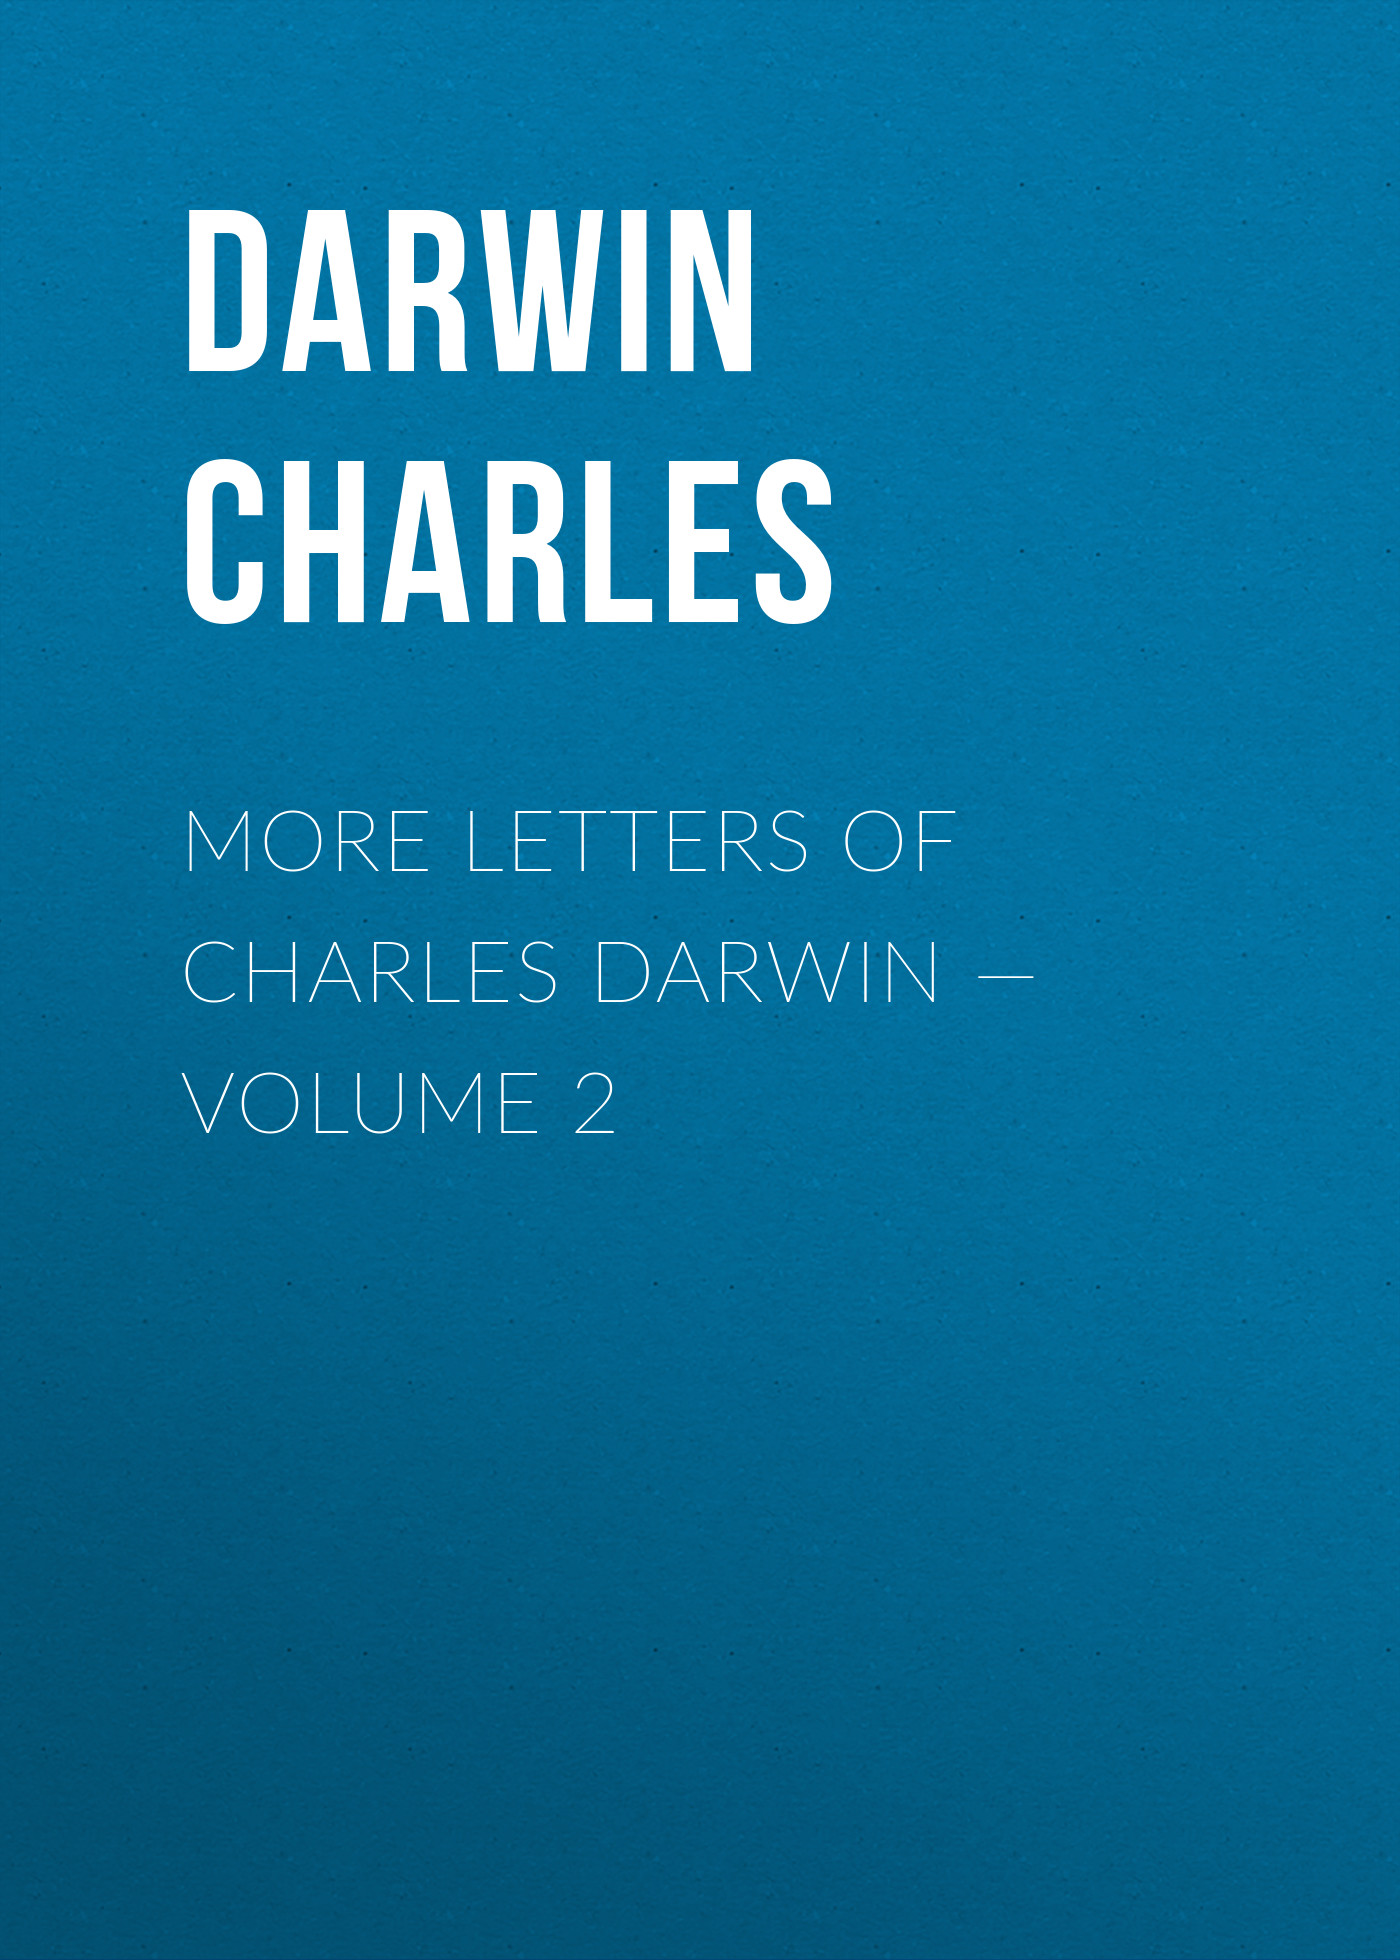 More Letters of Charles Darwin— Volume 2